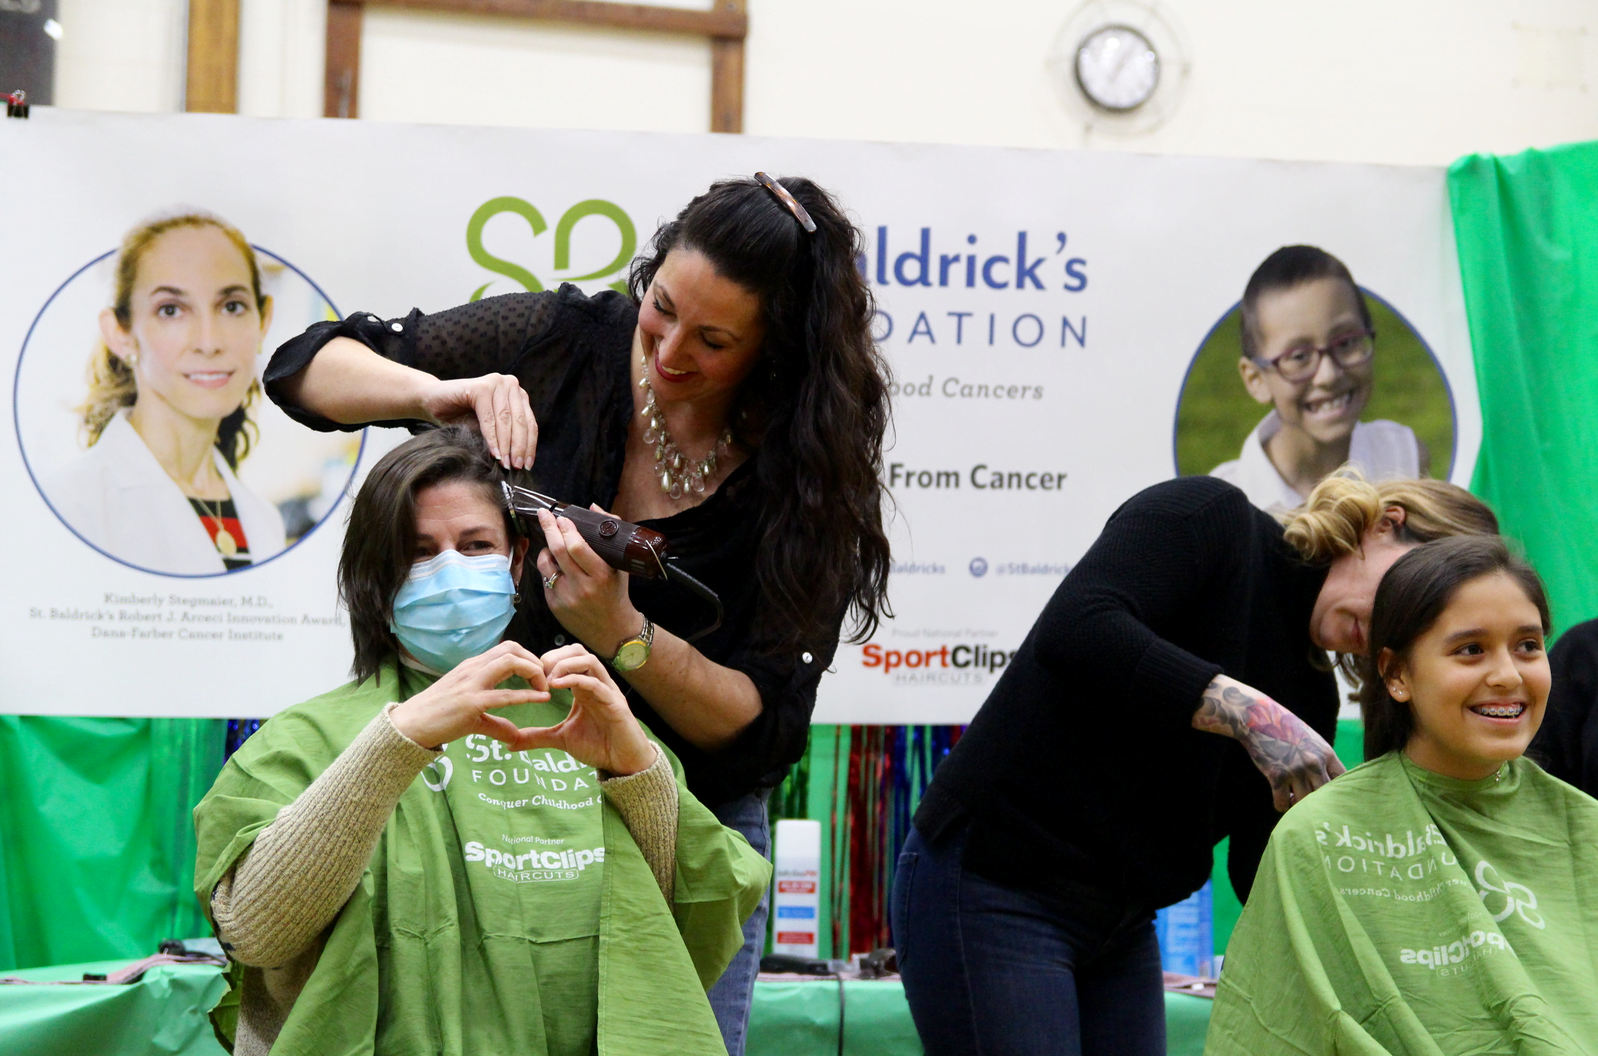 Heather Brown makes a heart as she prepares to be shaved to raise funds for St. Baldrick's Foundation. March 15, 2018 Photo: Leslie Yager